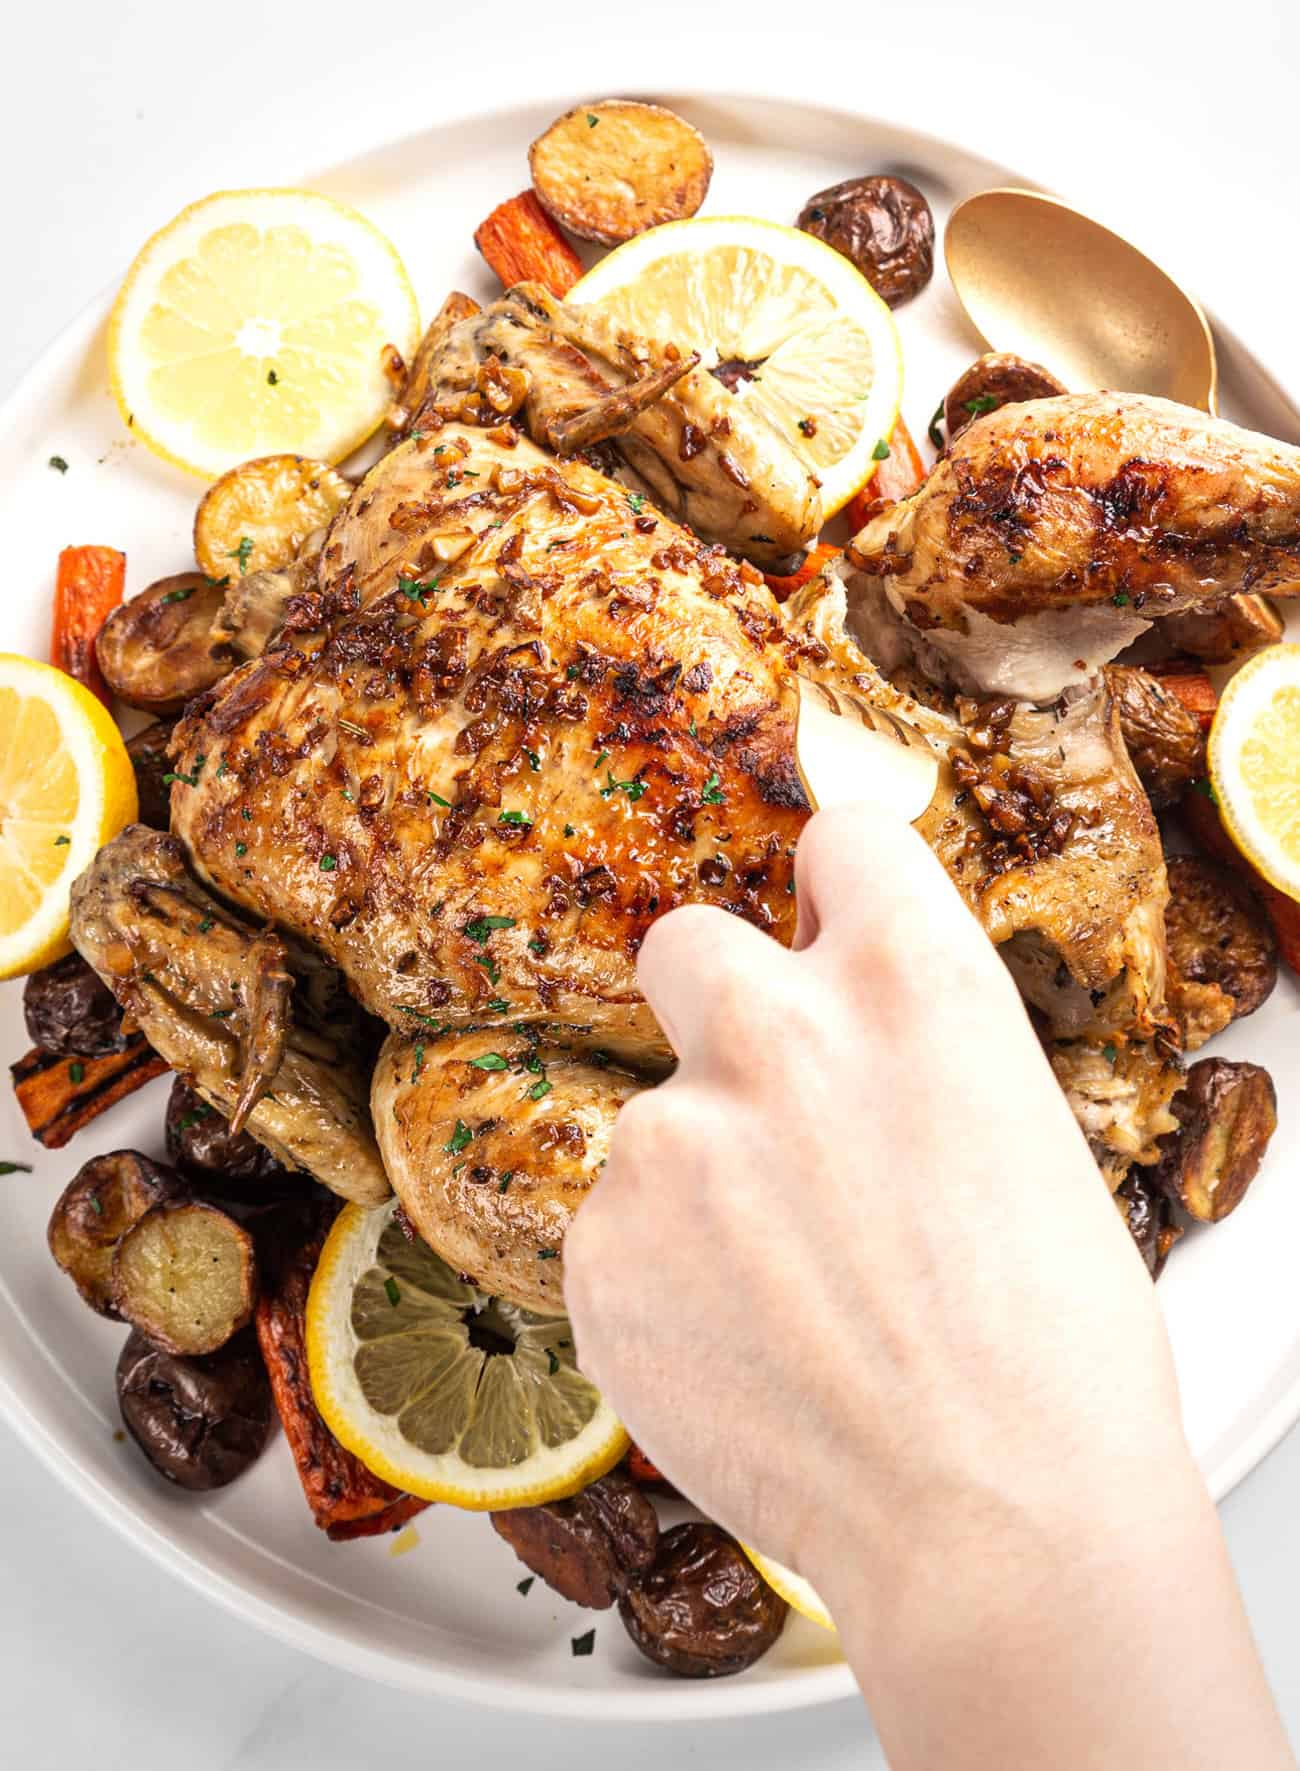 Tracy Cooks in Austin: Whole Chicken in the pressure cooker, the new Nesco  Digital Pressure Cooker, a slight redo. One chicken, one pressure cooker  equals loads of cooked meat and 8 cups